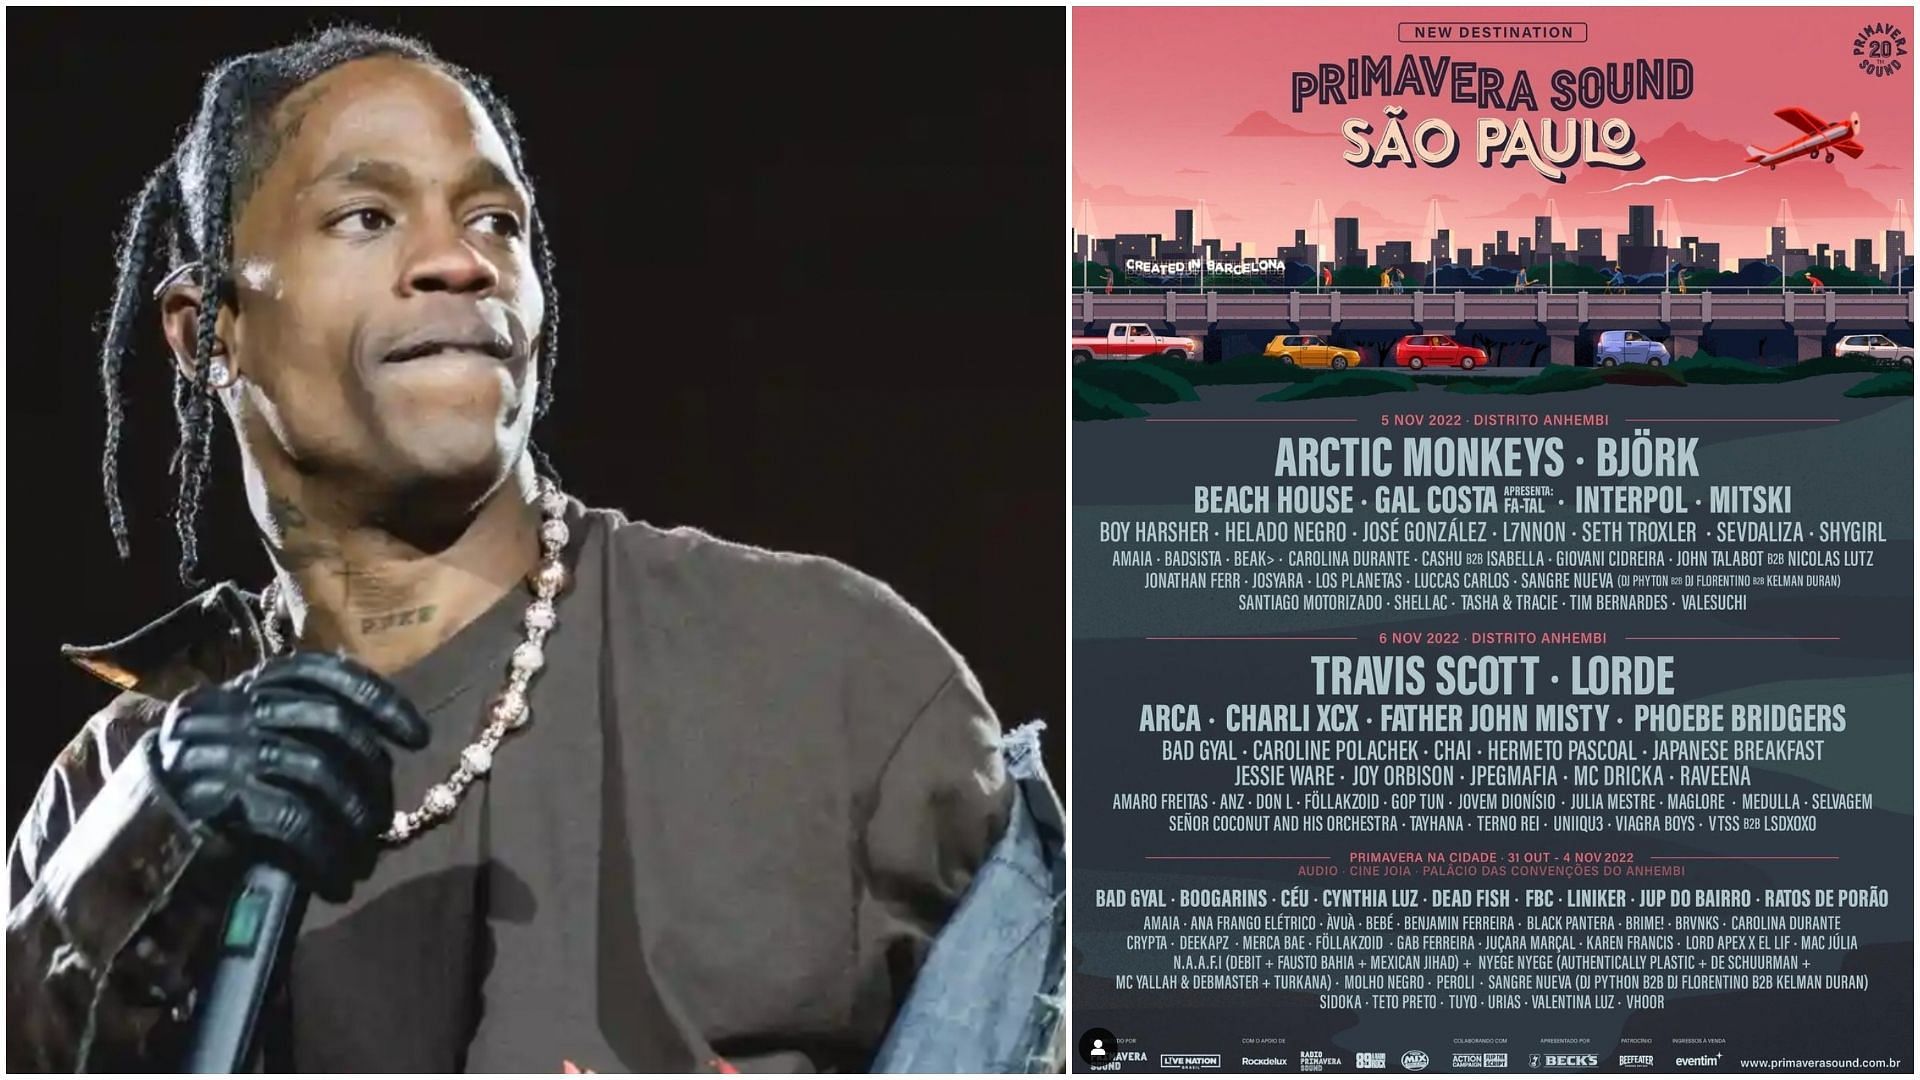 Travis Scott is among the headliners announced for the Primavera Sound Festival. (Images via AP and Instagram / @primaver_sound)